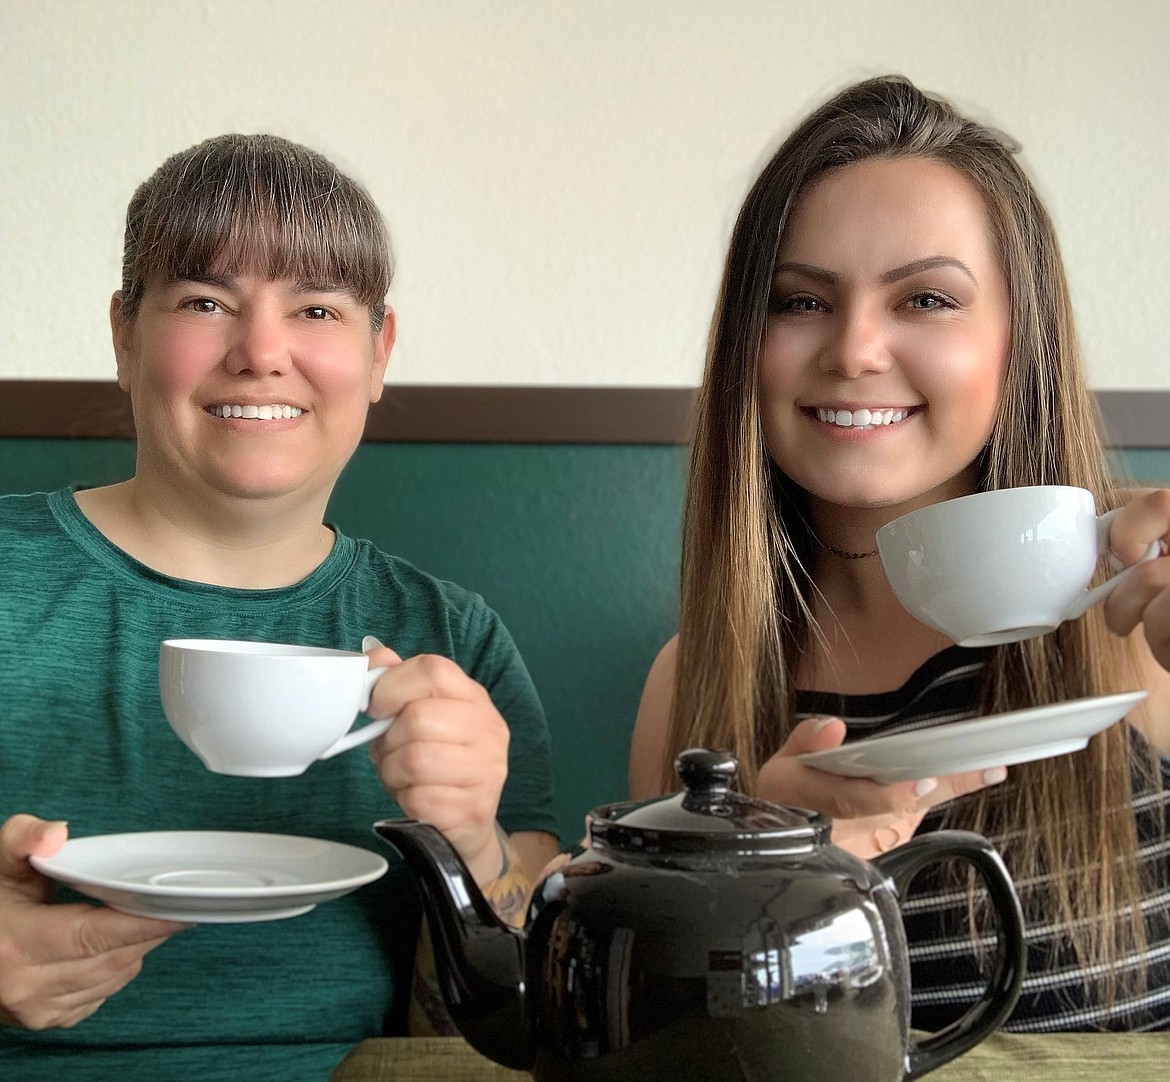 Courtesy photo
Owners Kelli Sobczuk and Jessi Sobczuk enjoy a cup of tea at Inland Cafe & Tea in Suite 3 of the Fairgrounds Center at 4055 Government Way.